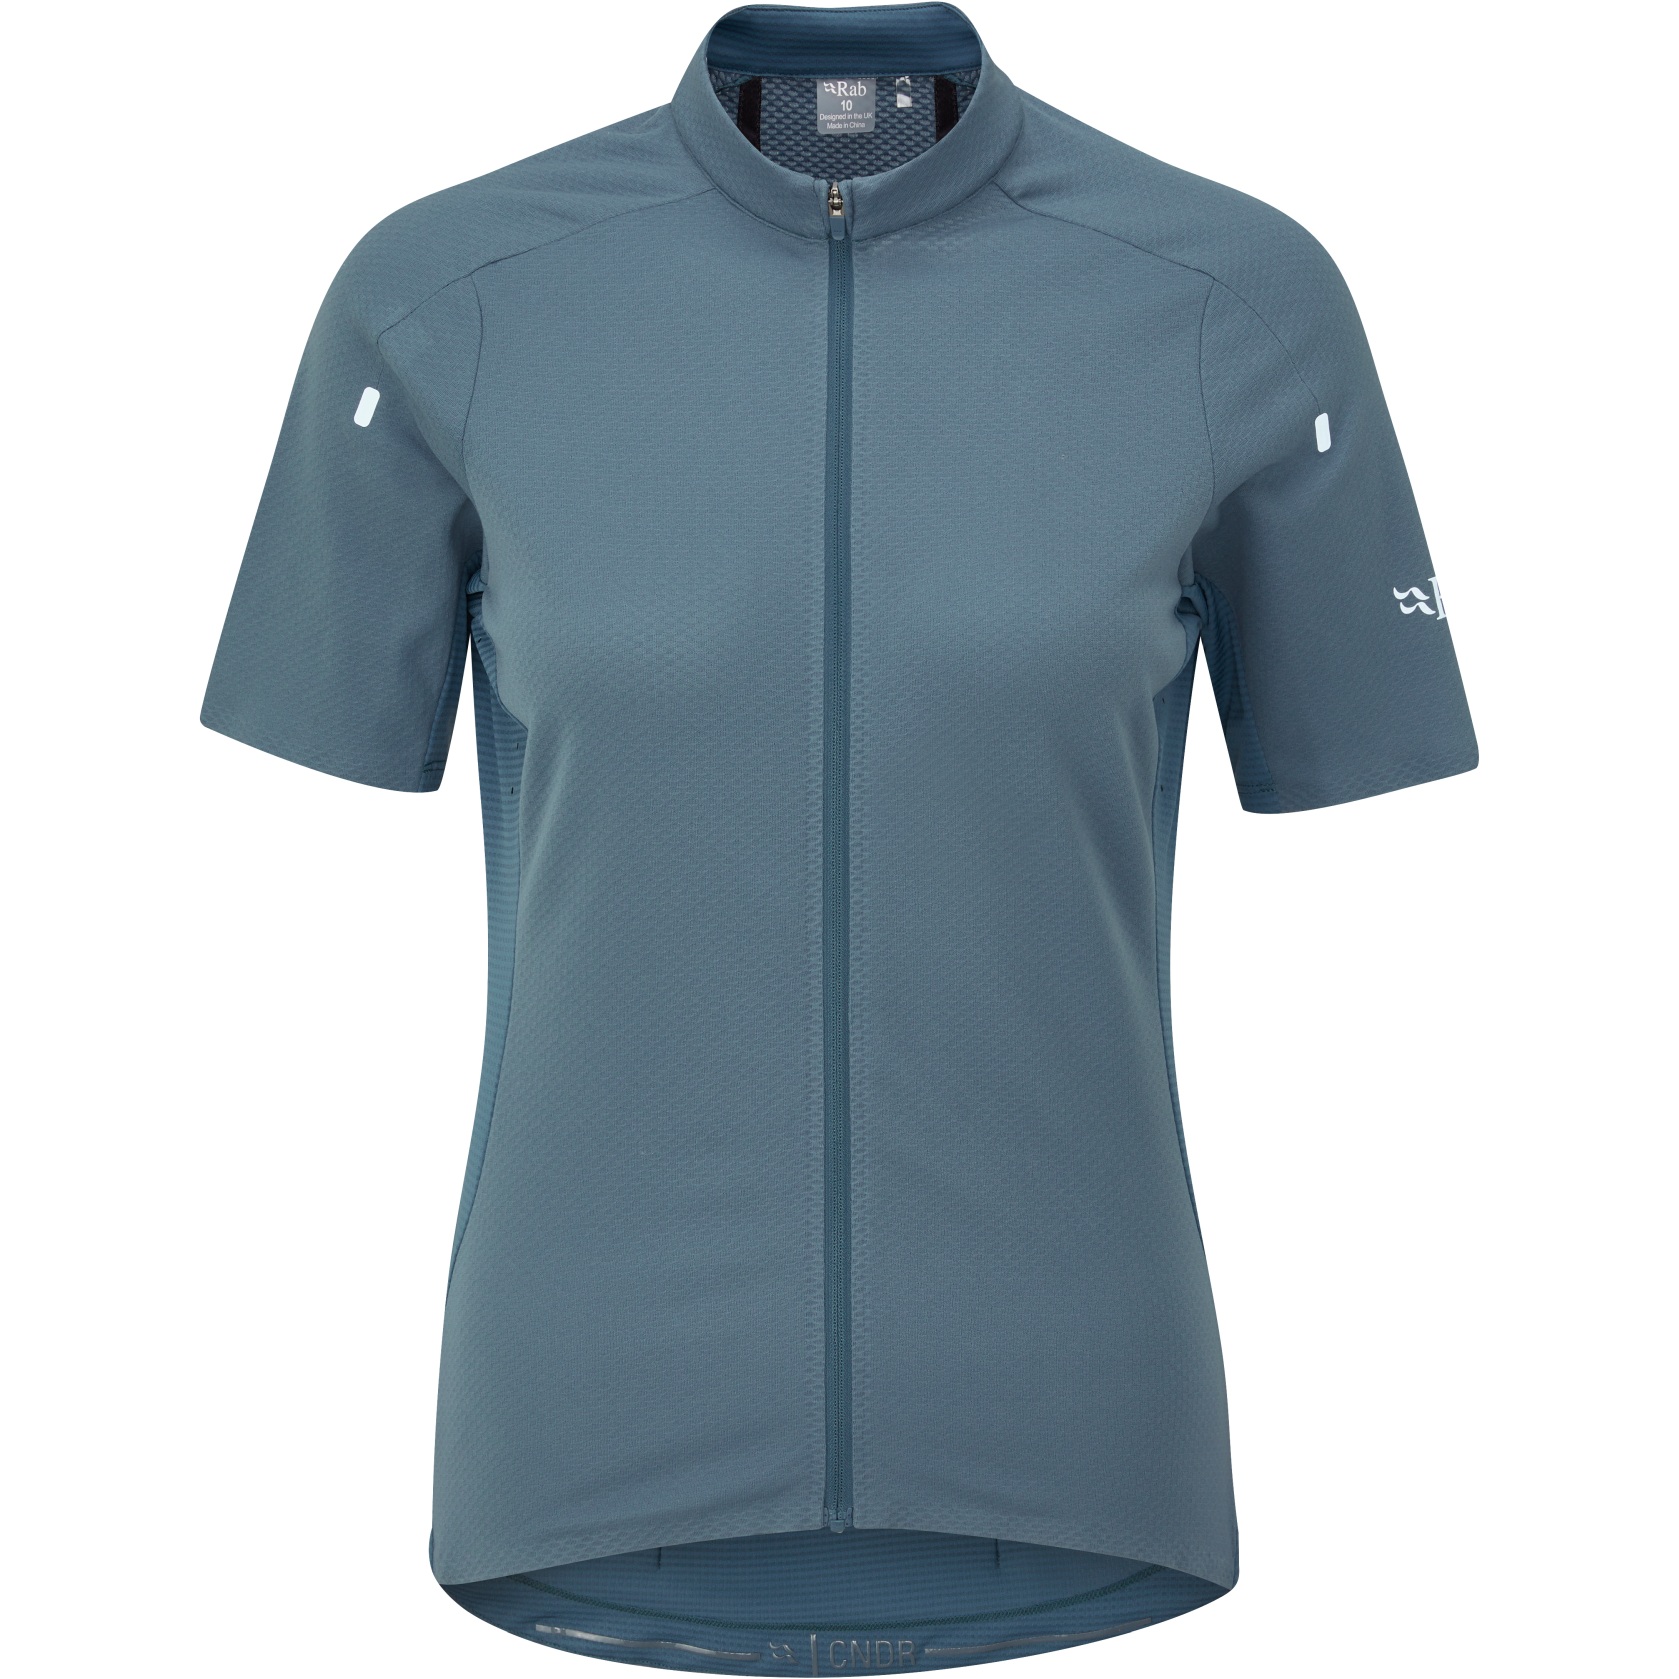 Picture of Rab Cinder Jersey Women - orion blue